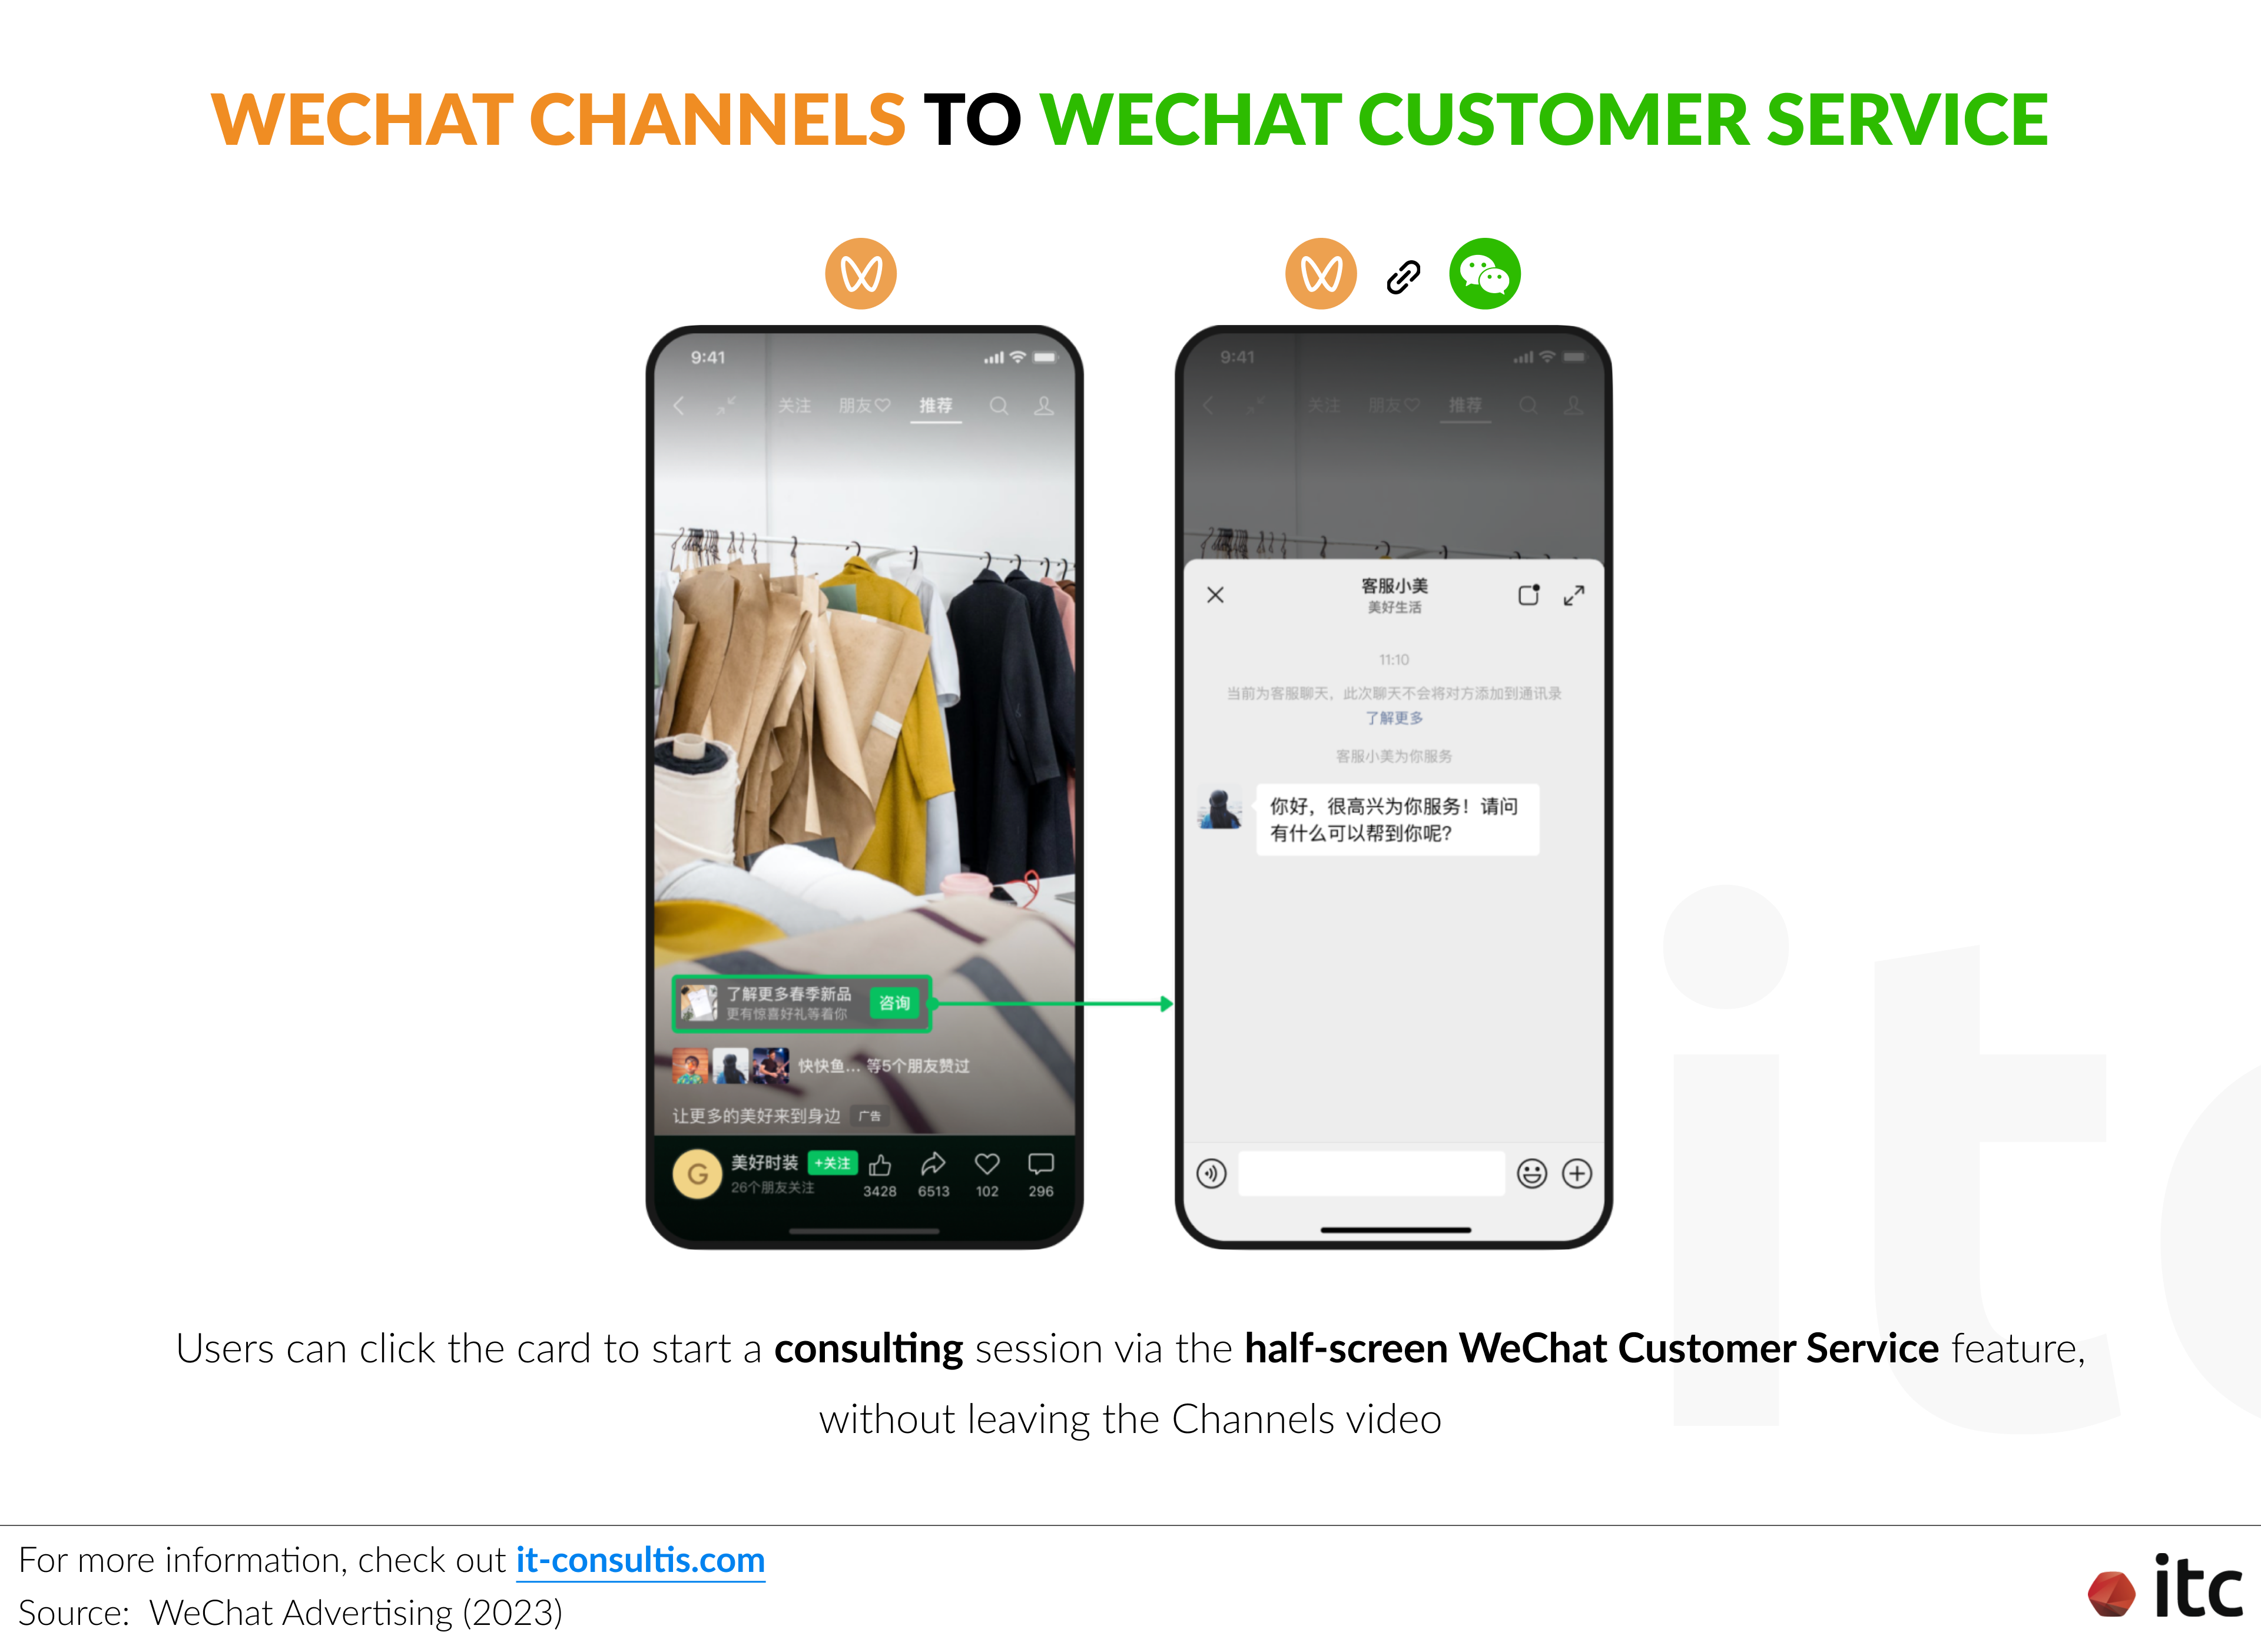 Users can click the card to start a consulting session via the half-screen WeChat Customer Service feature, without leaving the Channels video